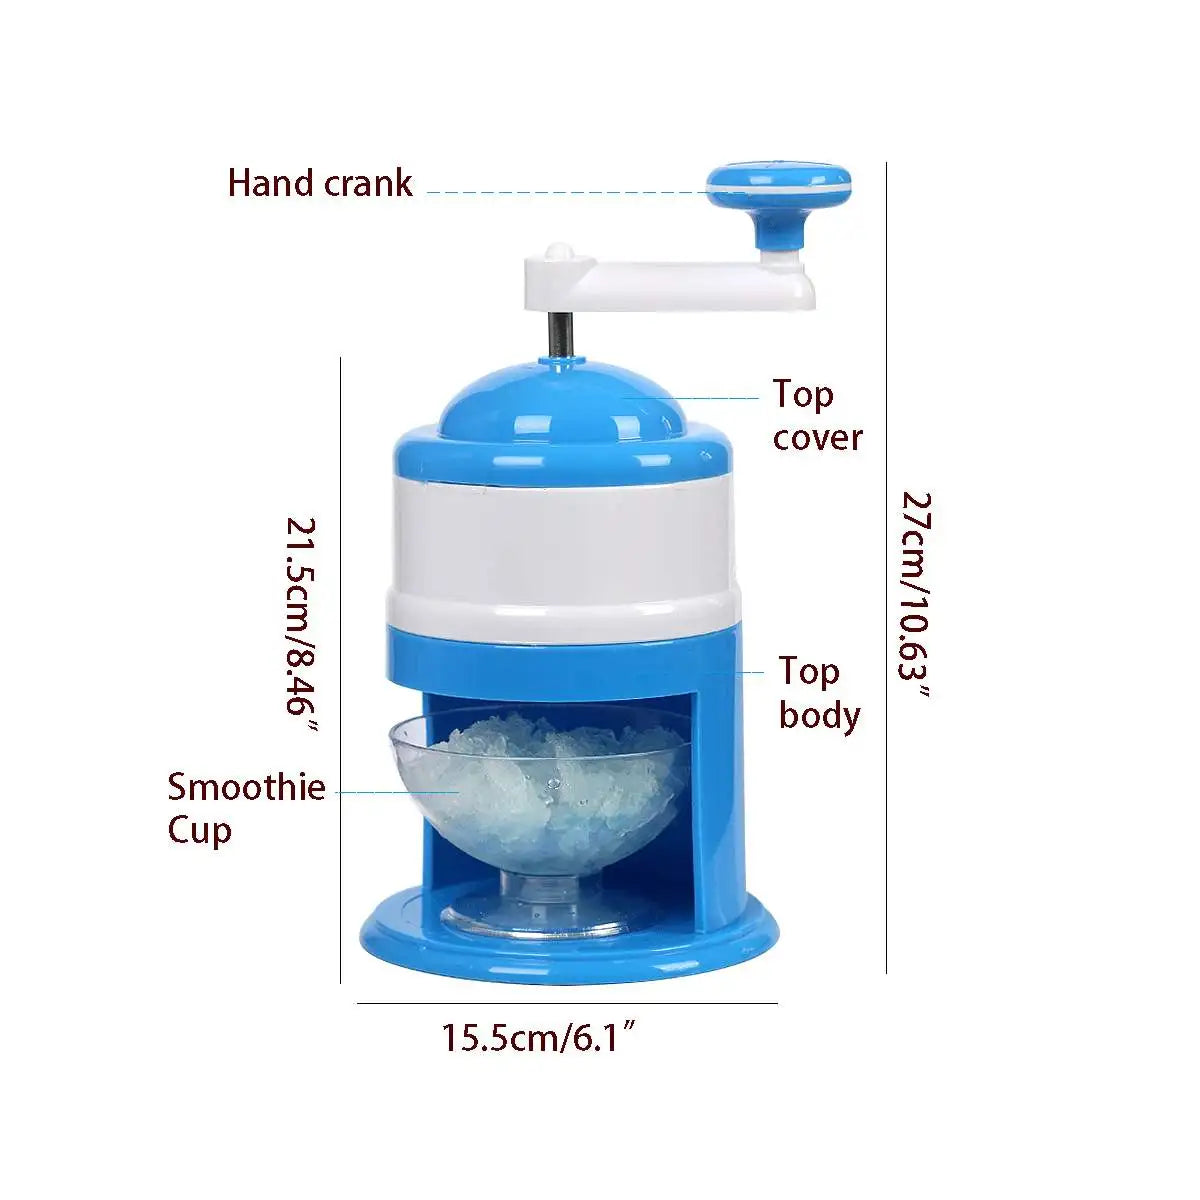 "Portable Hand Crank Ice Crusher: Create Perfectly Shaved Ice for Refreshing Drinks!"